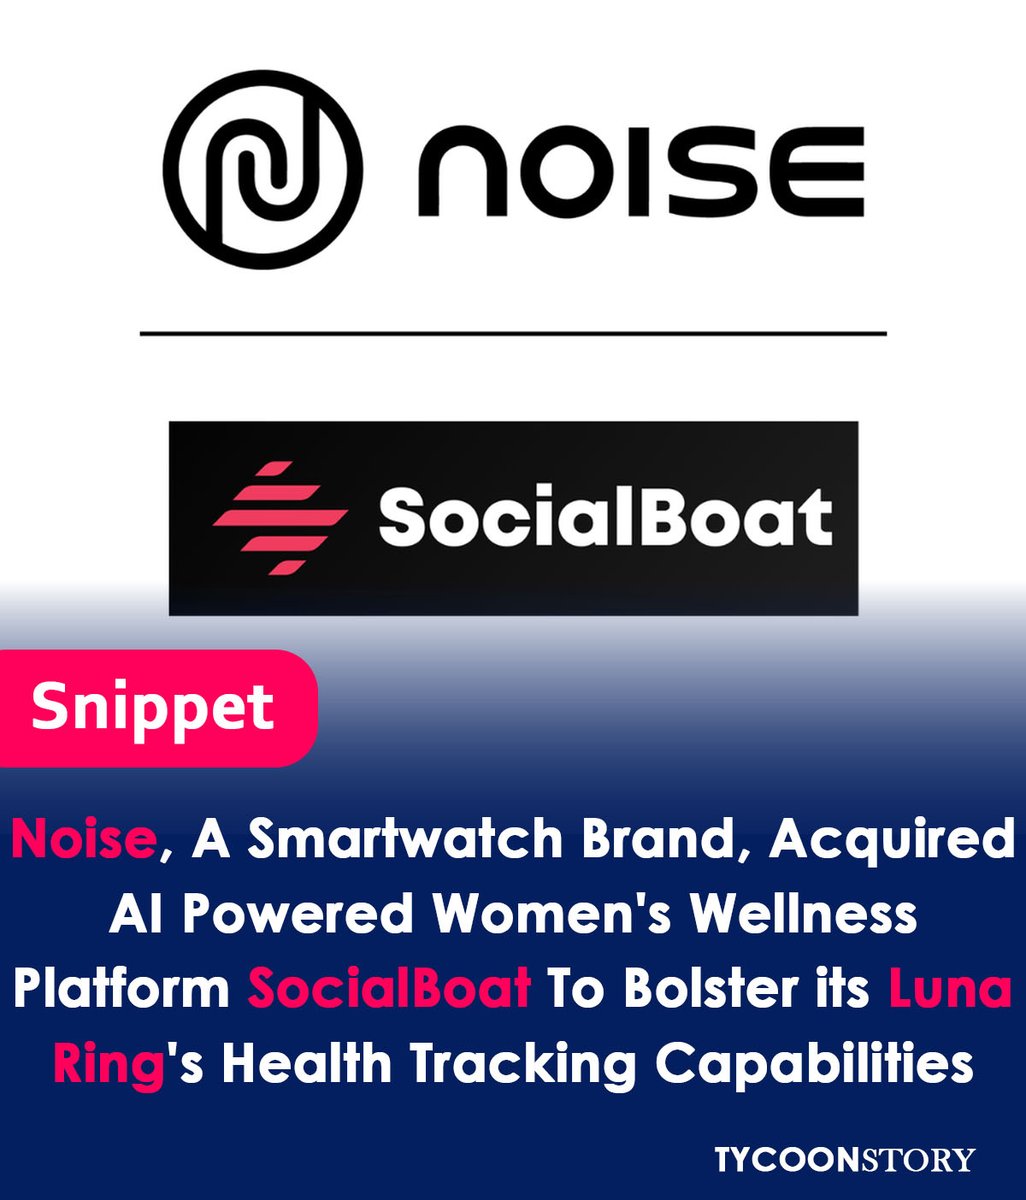 Noise Acquires Women's Wellness Platform SocialBoat to Boost AI Features in Luna Ring #Smartwatch #SmartRing #WearableTech #ConnectedLifestyle #TechAcquisition #AIHealth #WomensHealth #AIWellness #Personalized #HealthTech #Noise @gonoise @socialboat_live tycoonstory.com